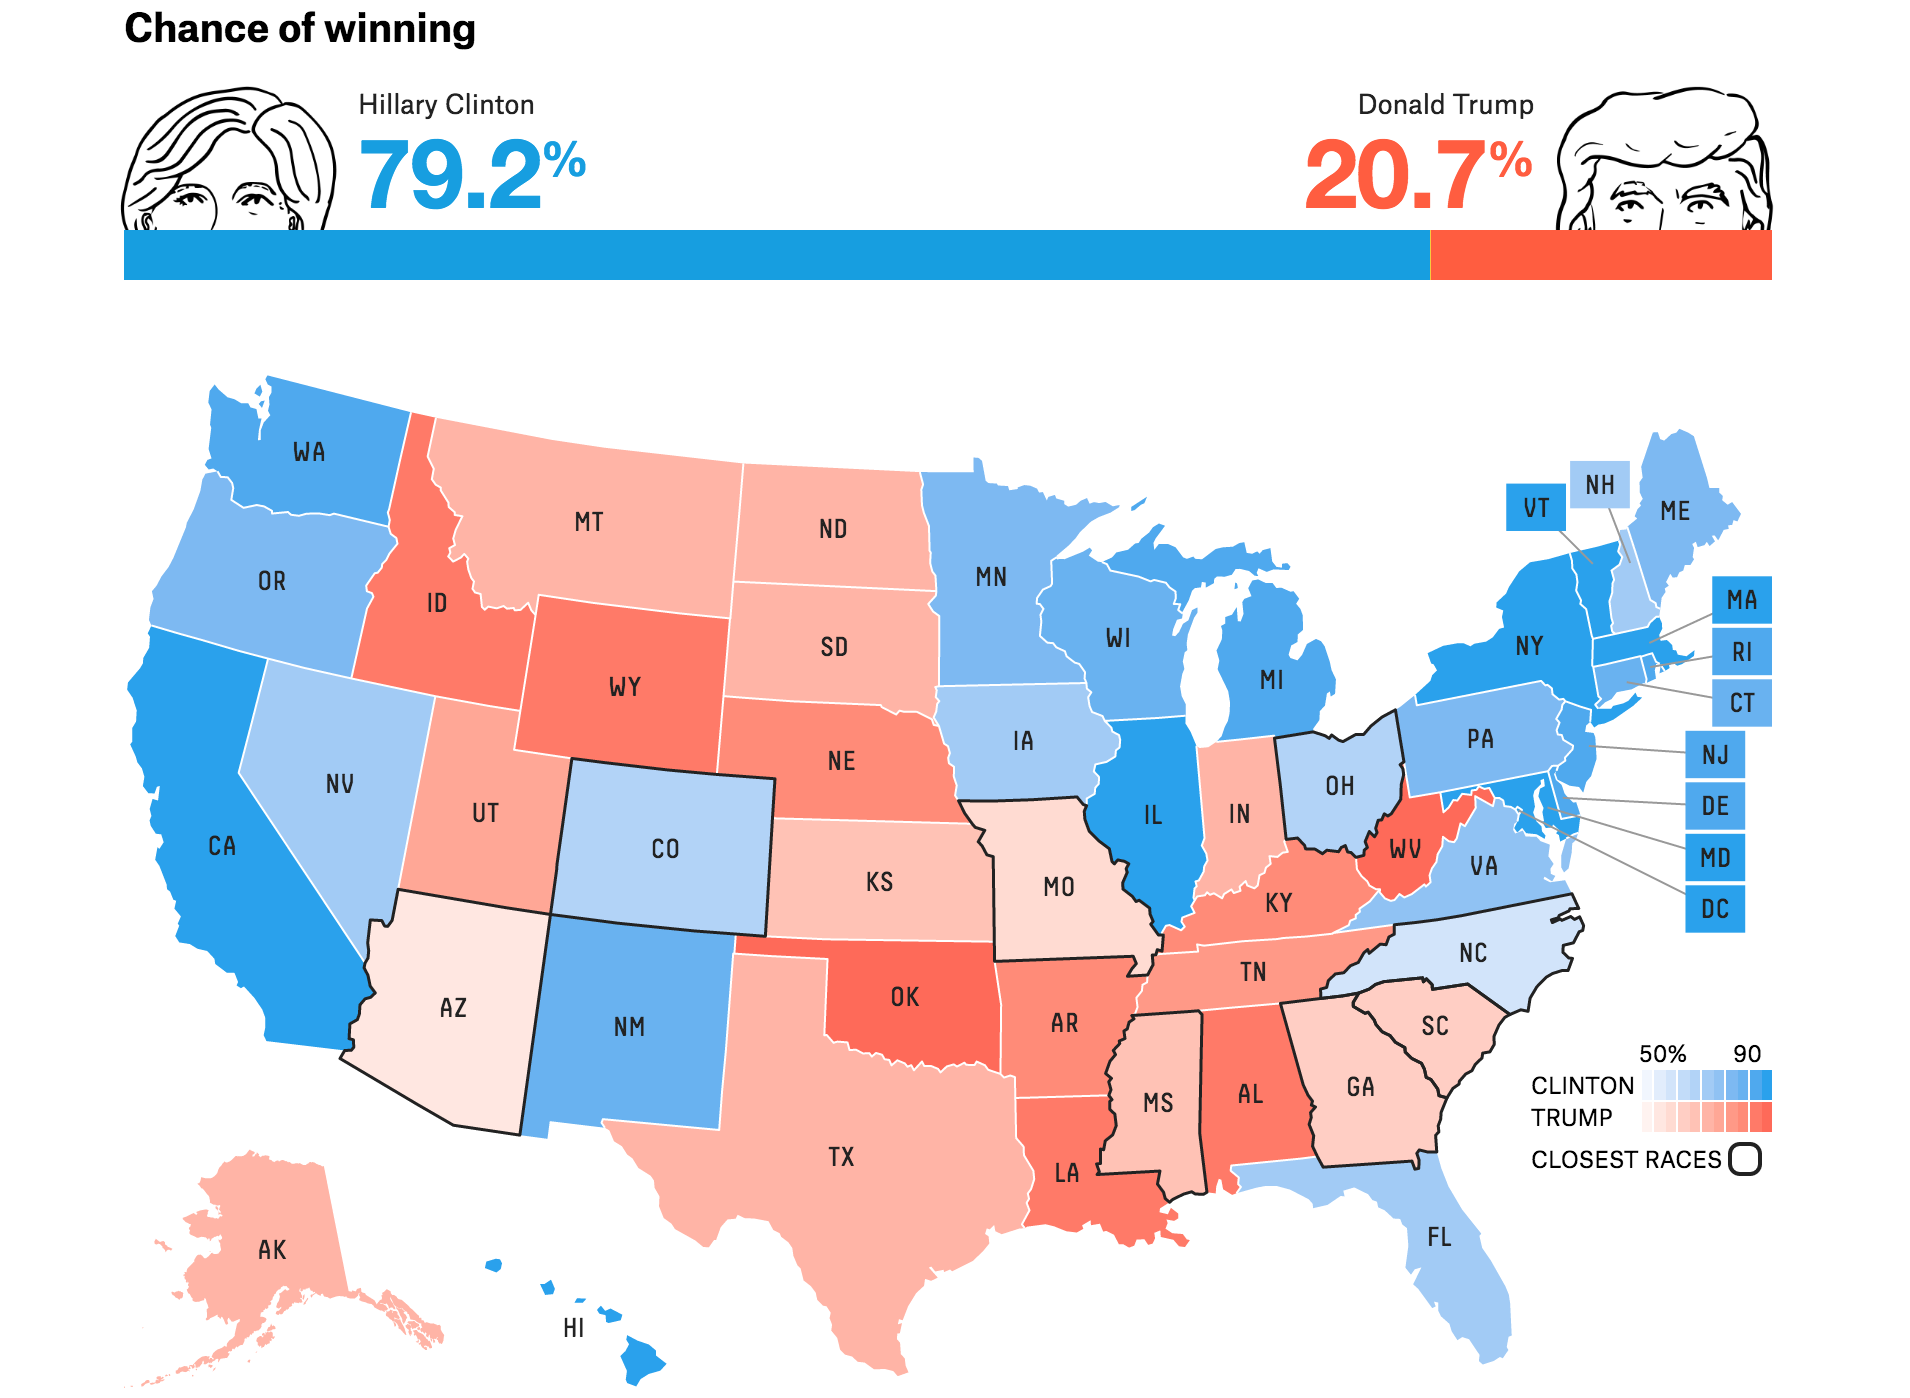 Nate Silver correctly predicted the outcome in all 50 states at the 2012 presidential election